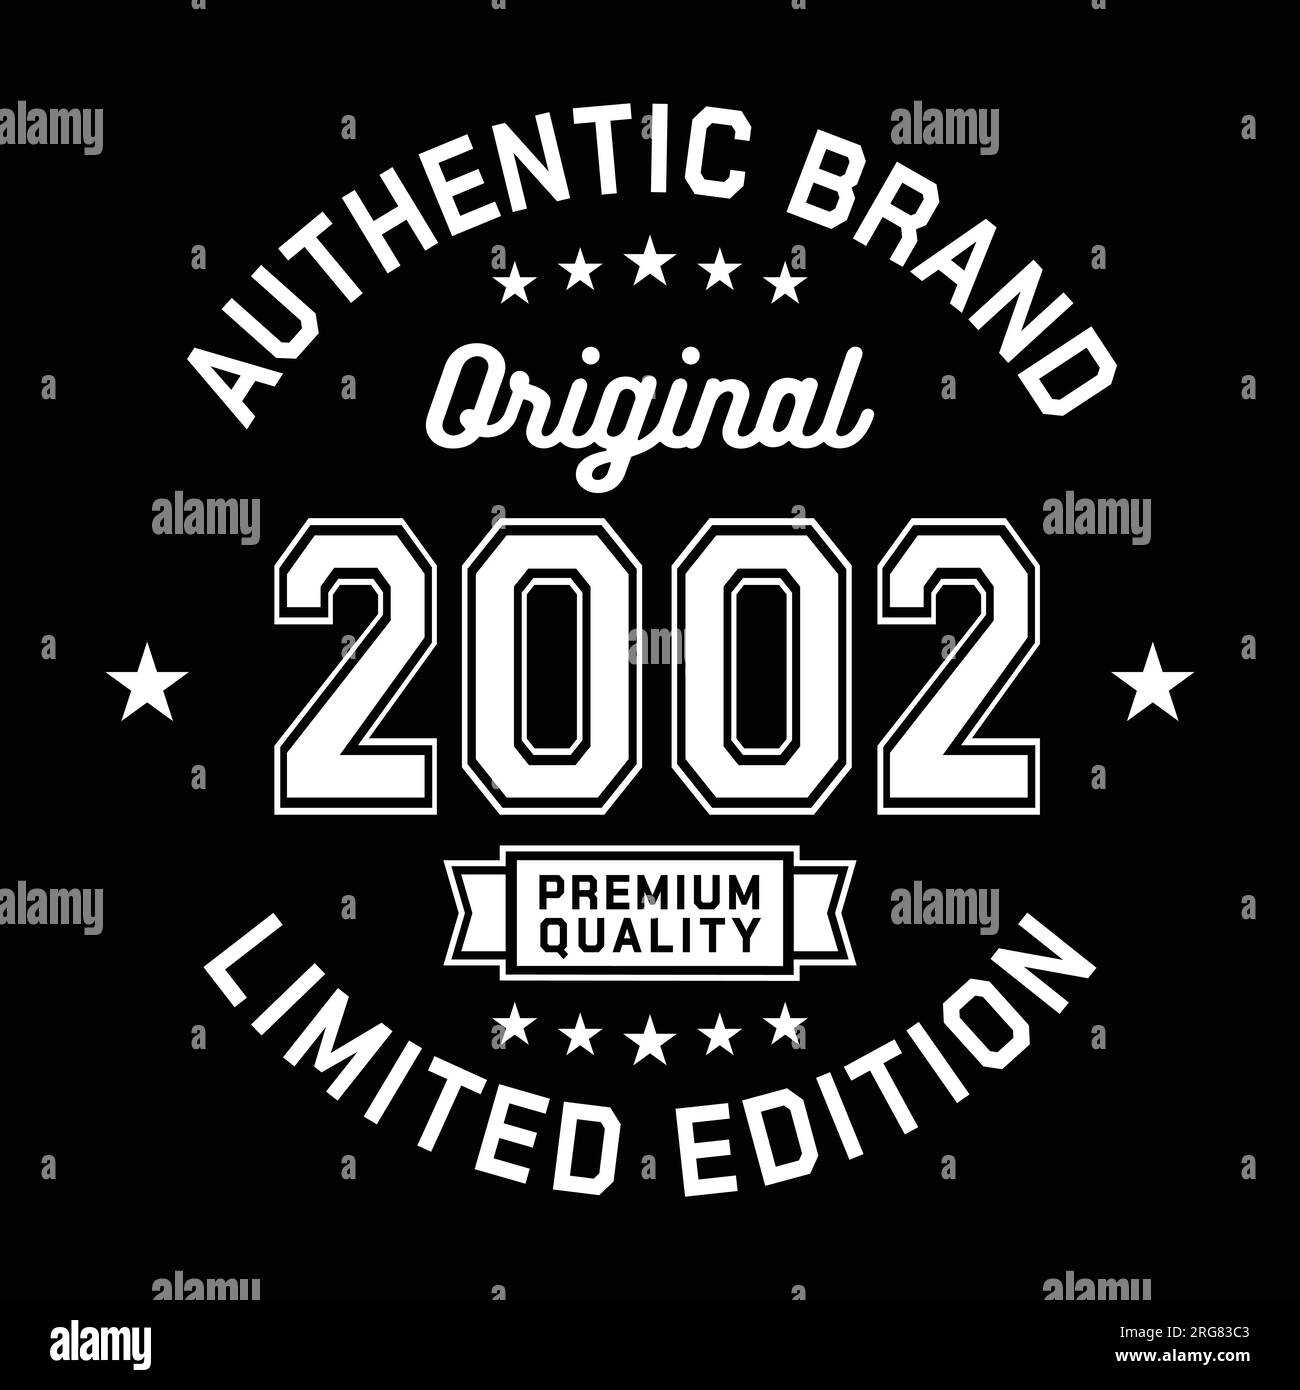 2002 Authentic brand. Apparel fashion design. Graphic design for t-shirt. Vector and illustration. Stock Vector